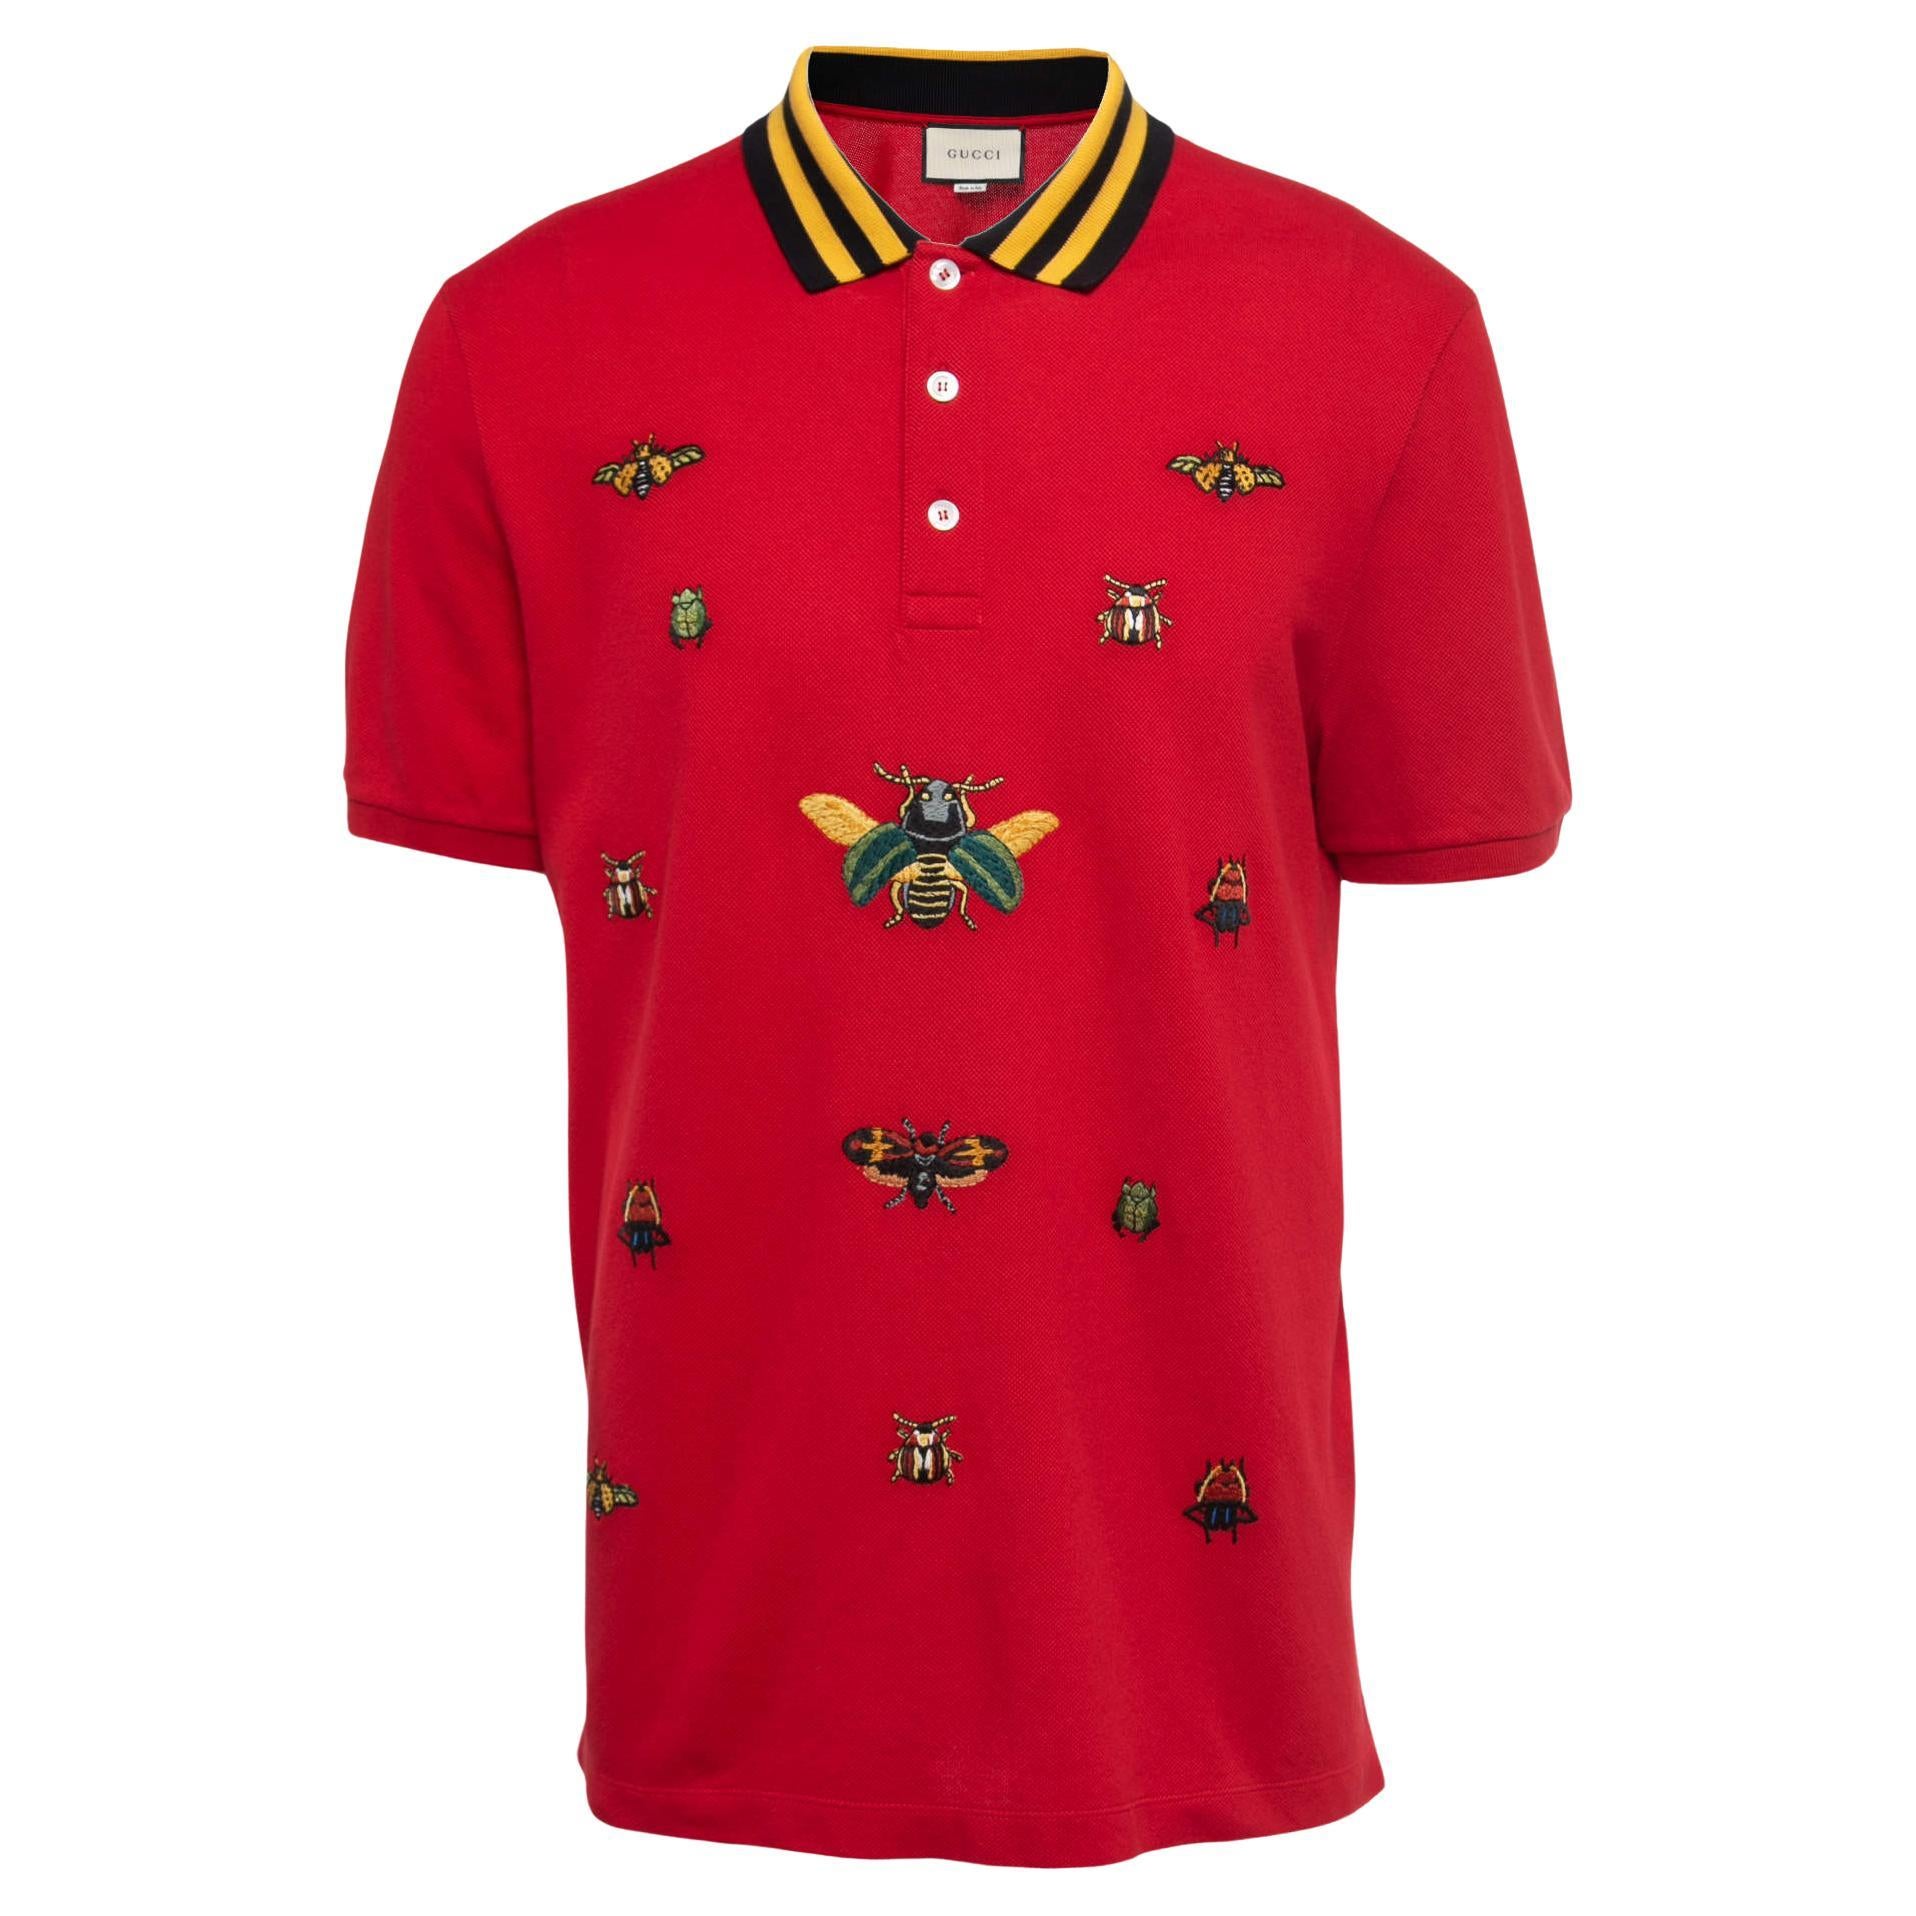 Gucci Red Cotton Pique Insects Embroidered Polo T-Shirt 3XL